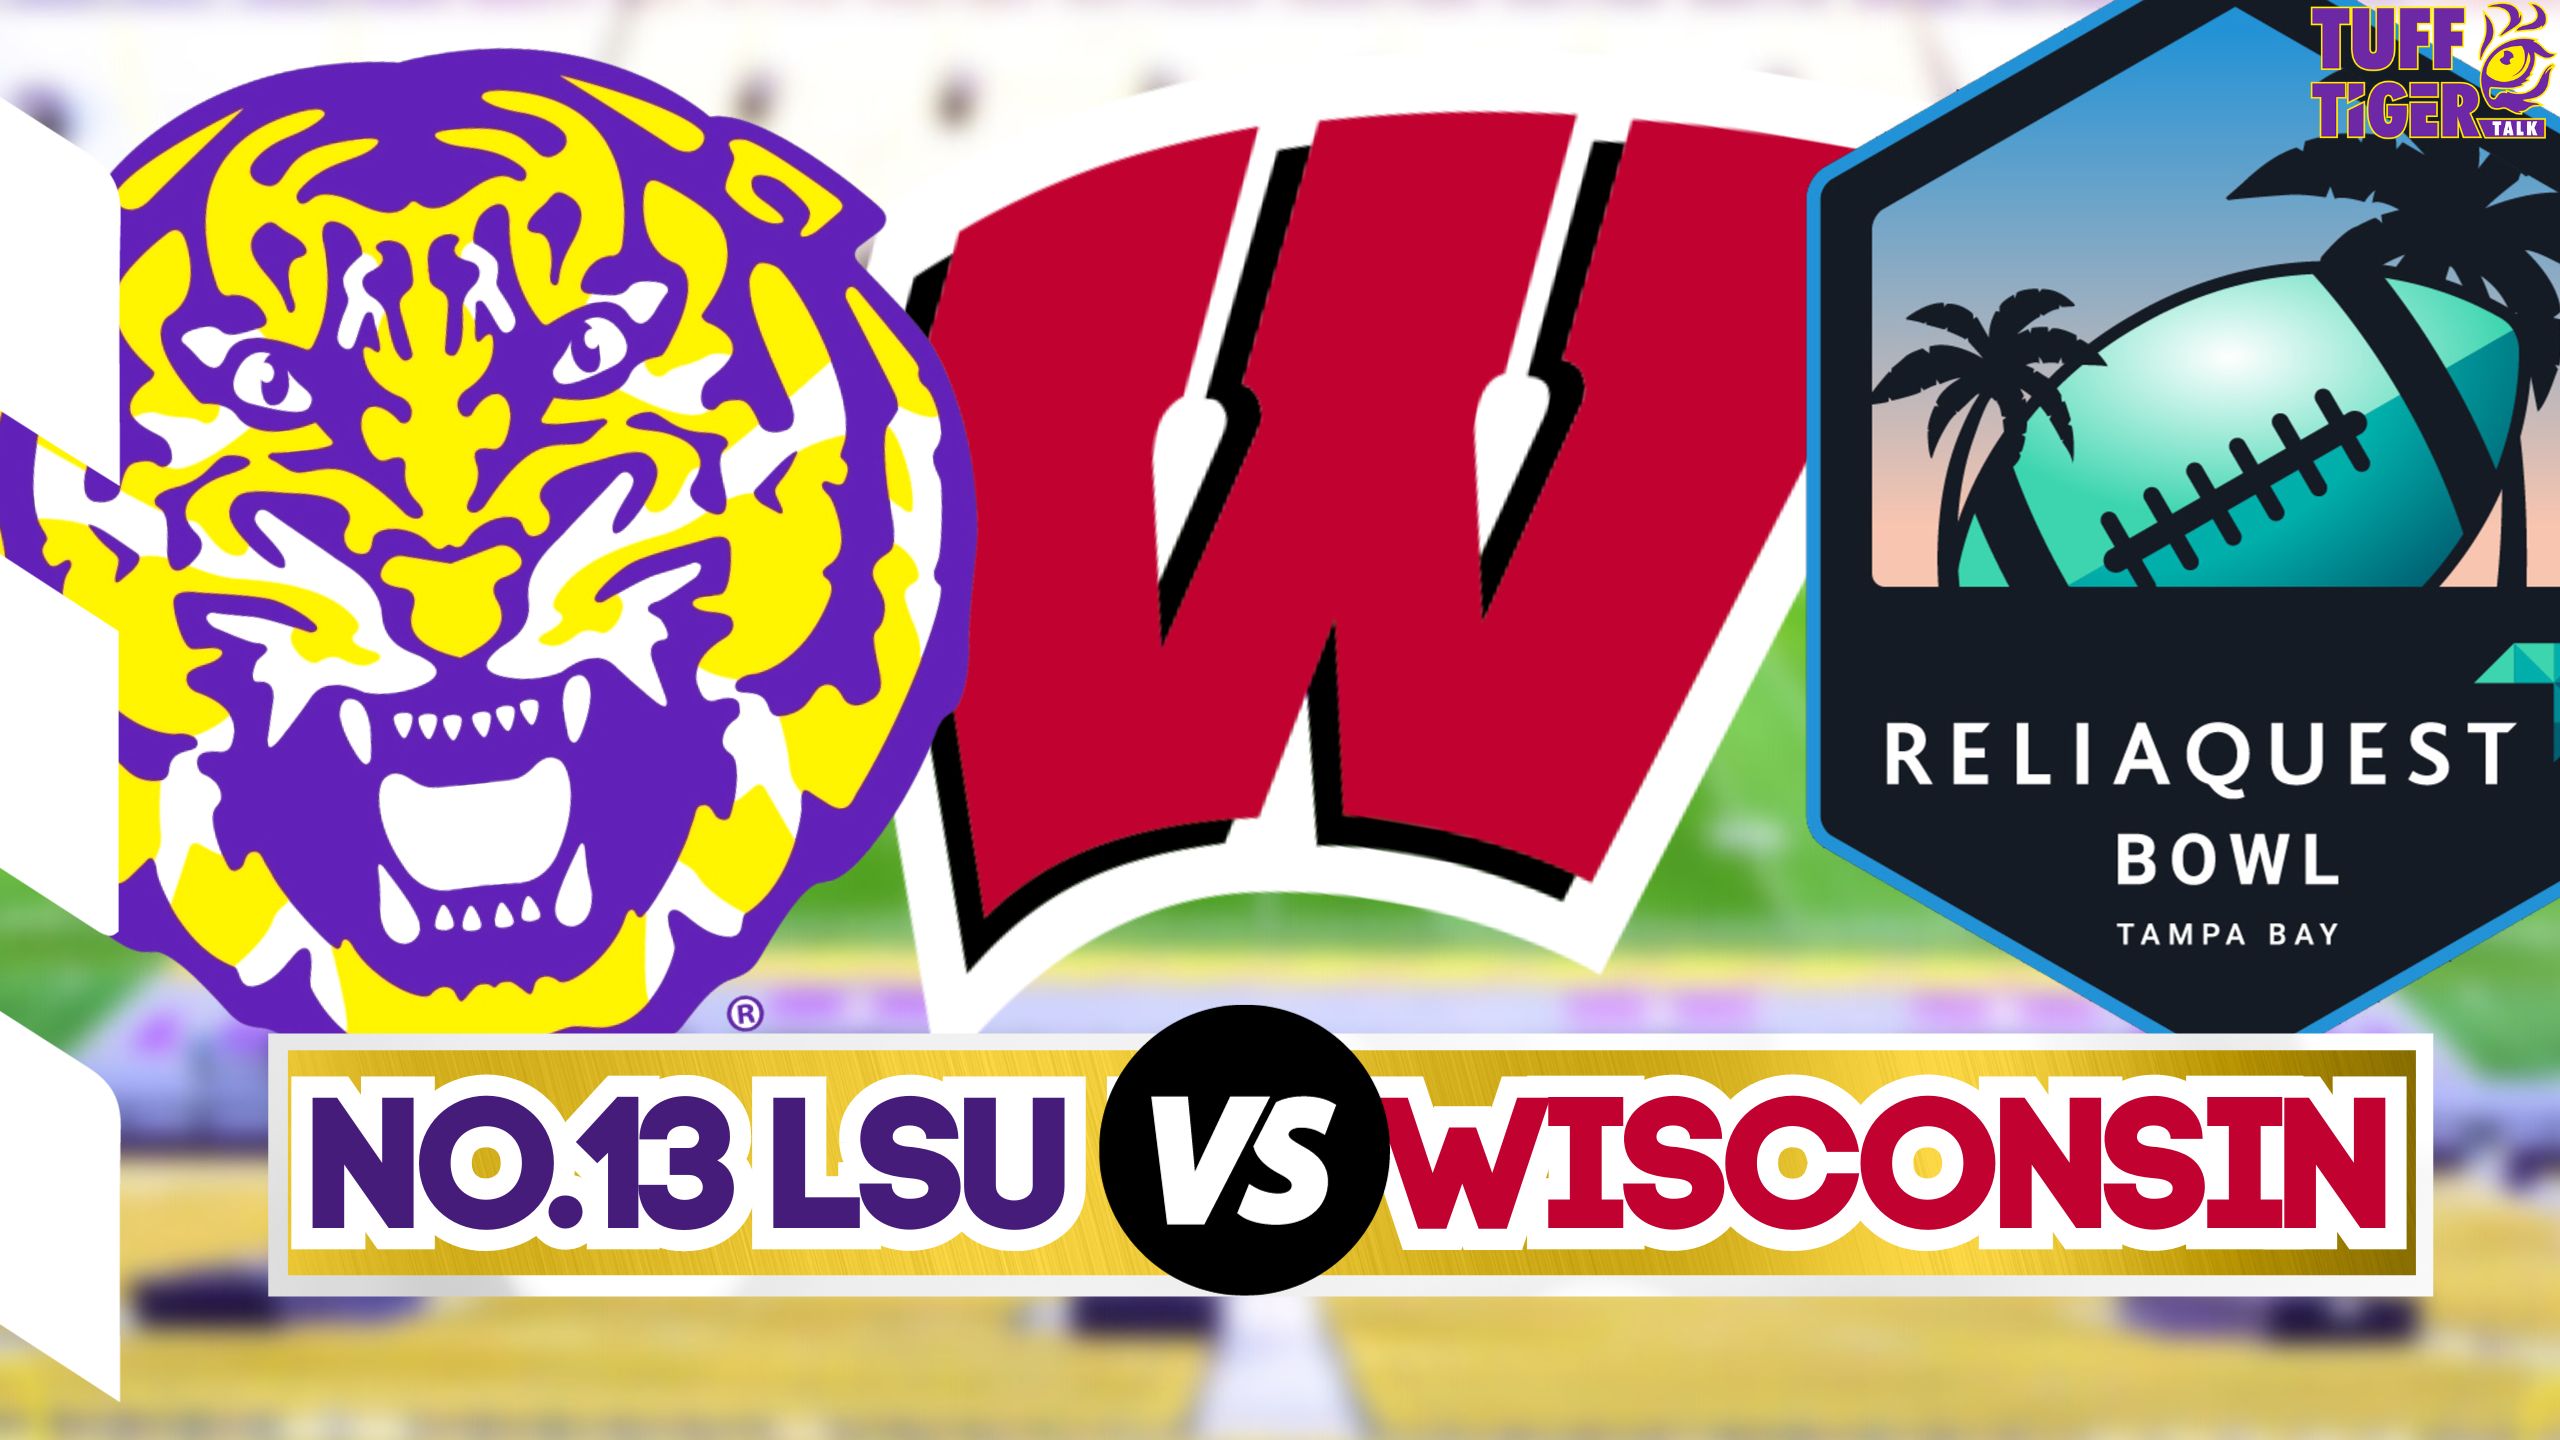 No Lsu Tigers Take On Wisconsin Badgers In Reliaquest Bowl Rematch The Who Dat Daily